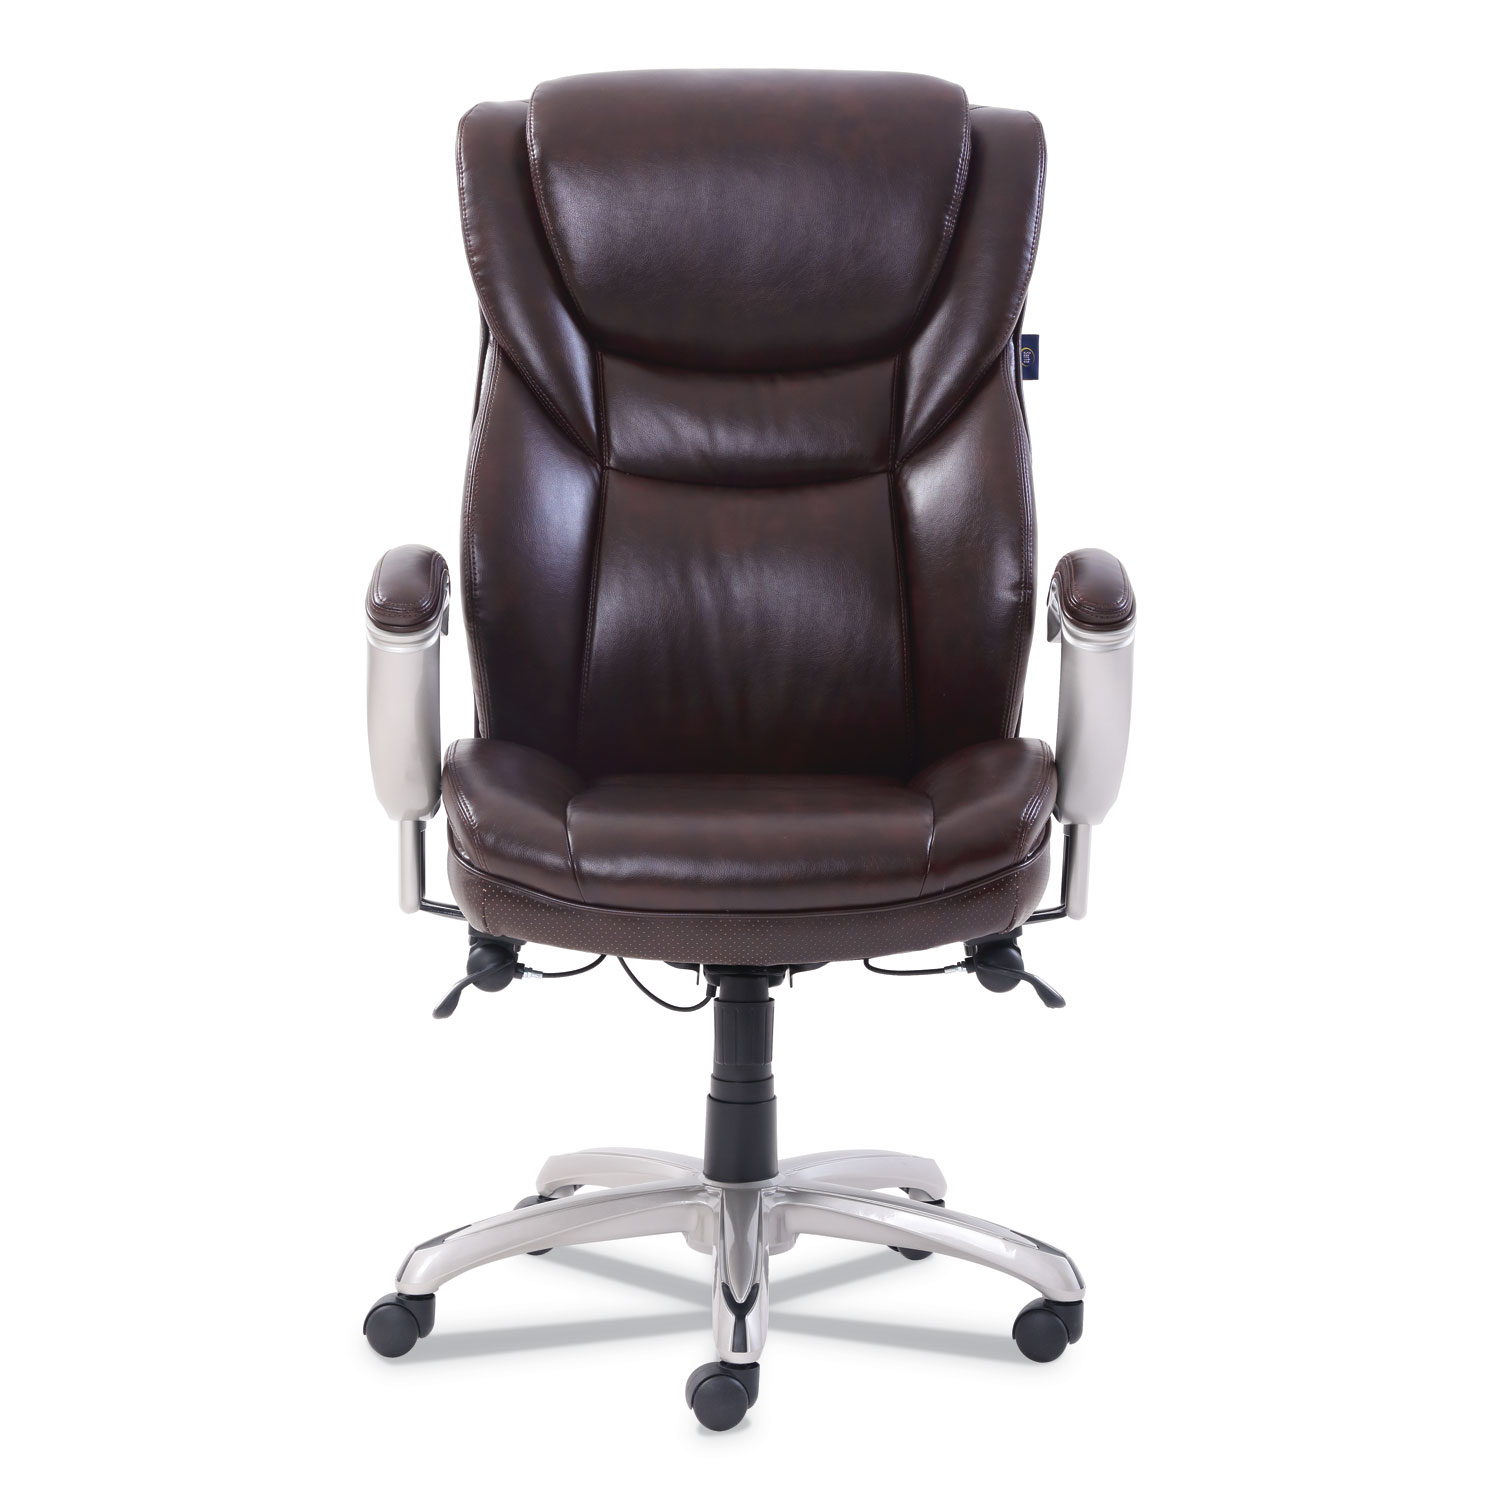 Emerson Executive Task Chair, Supports up to 300 lbs., Brown Seat/Brown Back, Silver Base